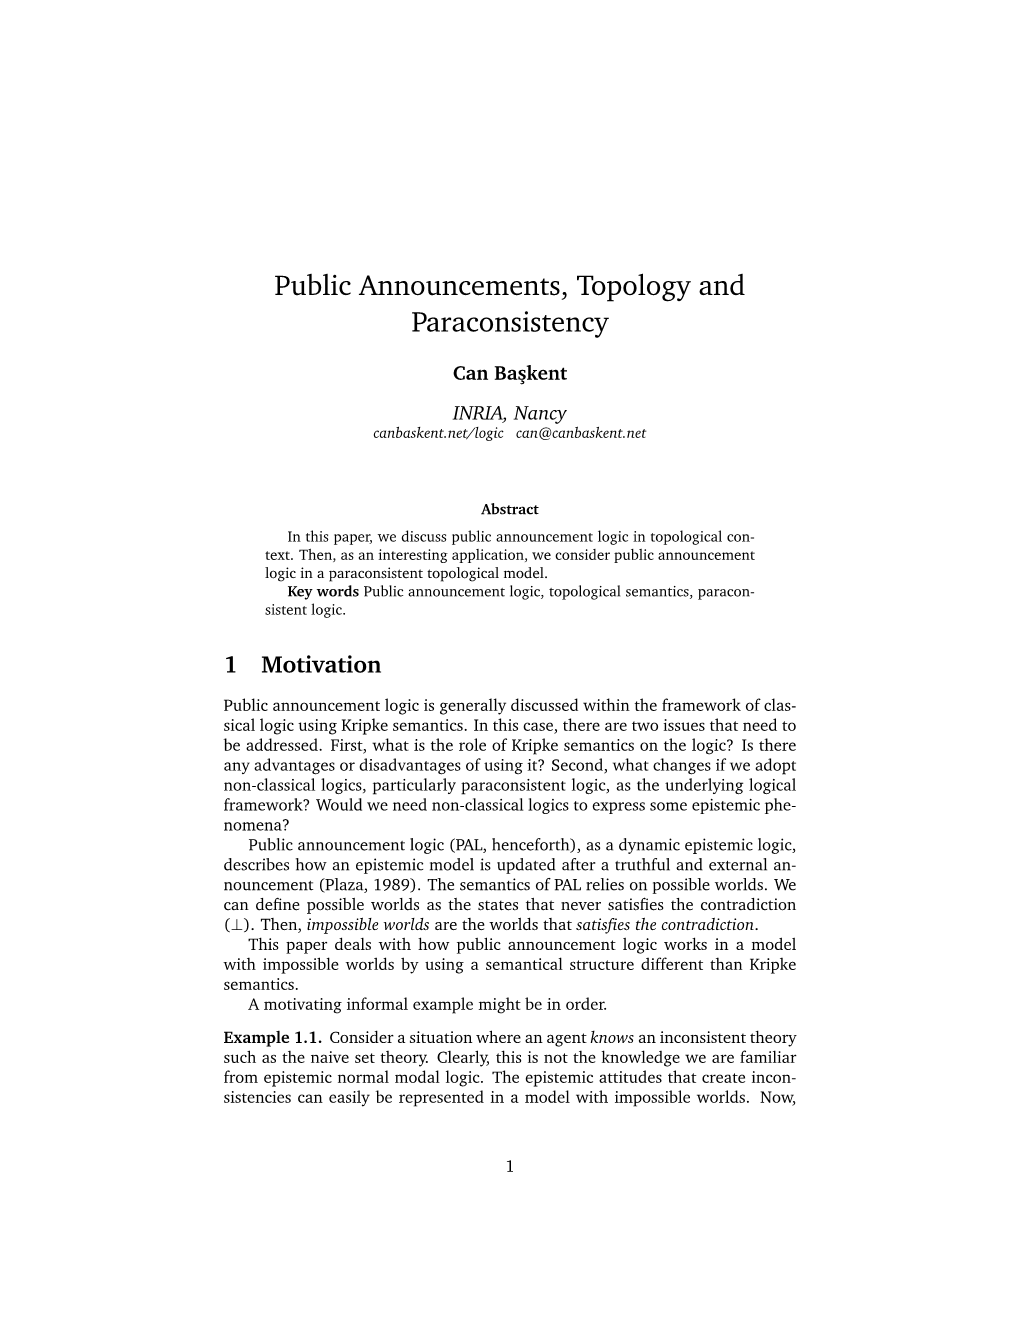 Public Announcements, Topology and Paraconsistency